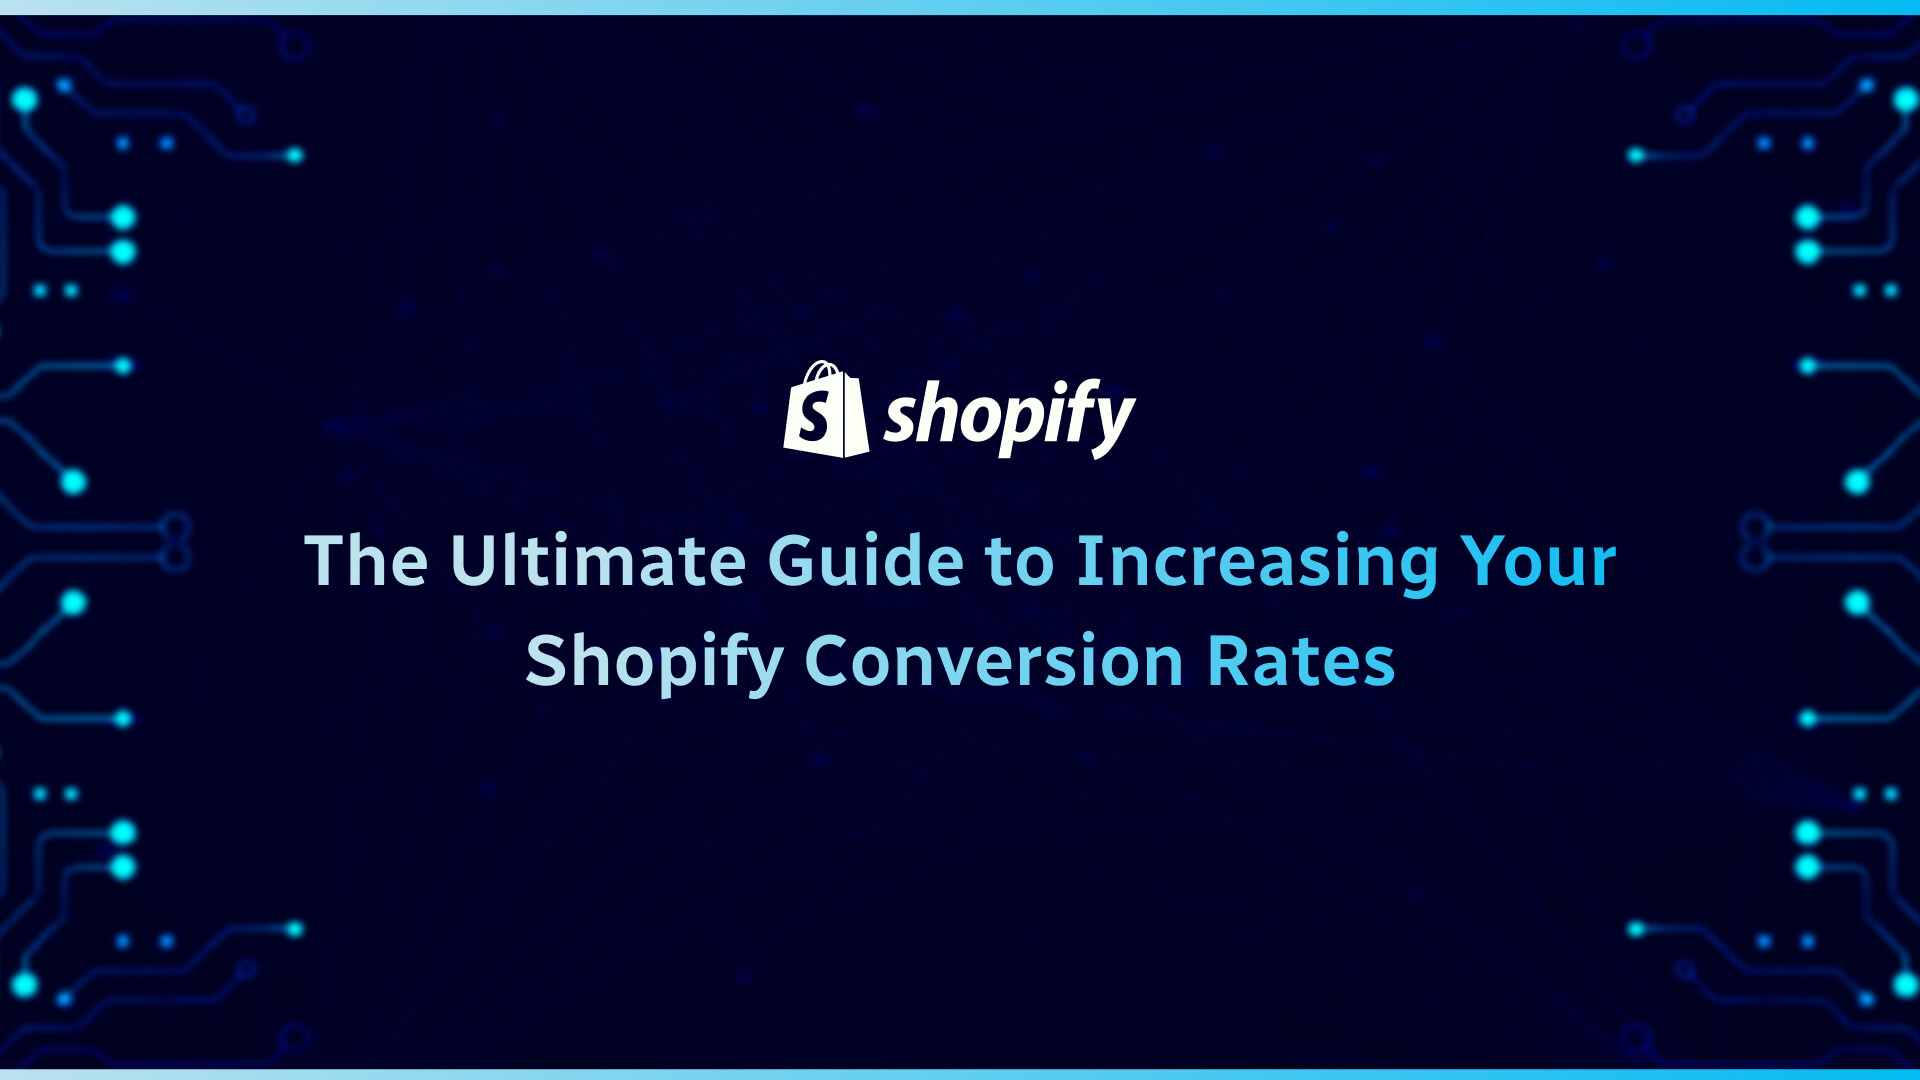 The Ultimate Guide to Increasing Your Shopify Conversion Rates